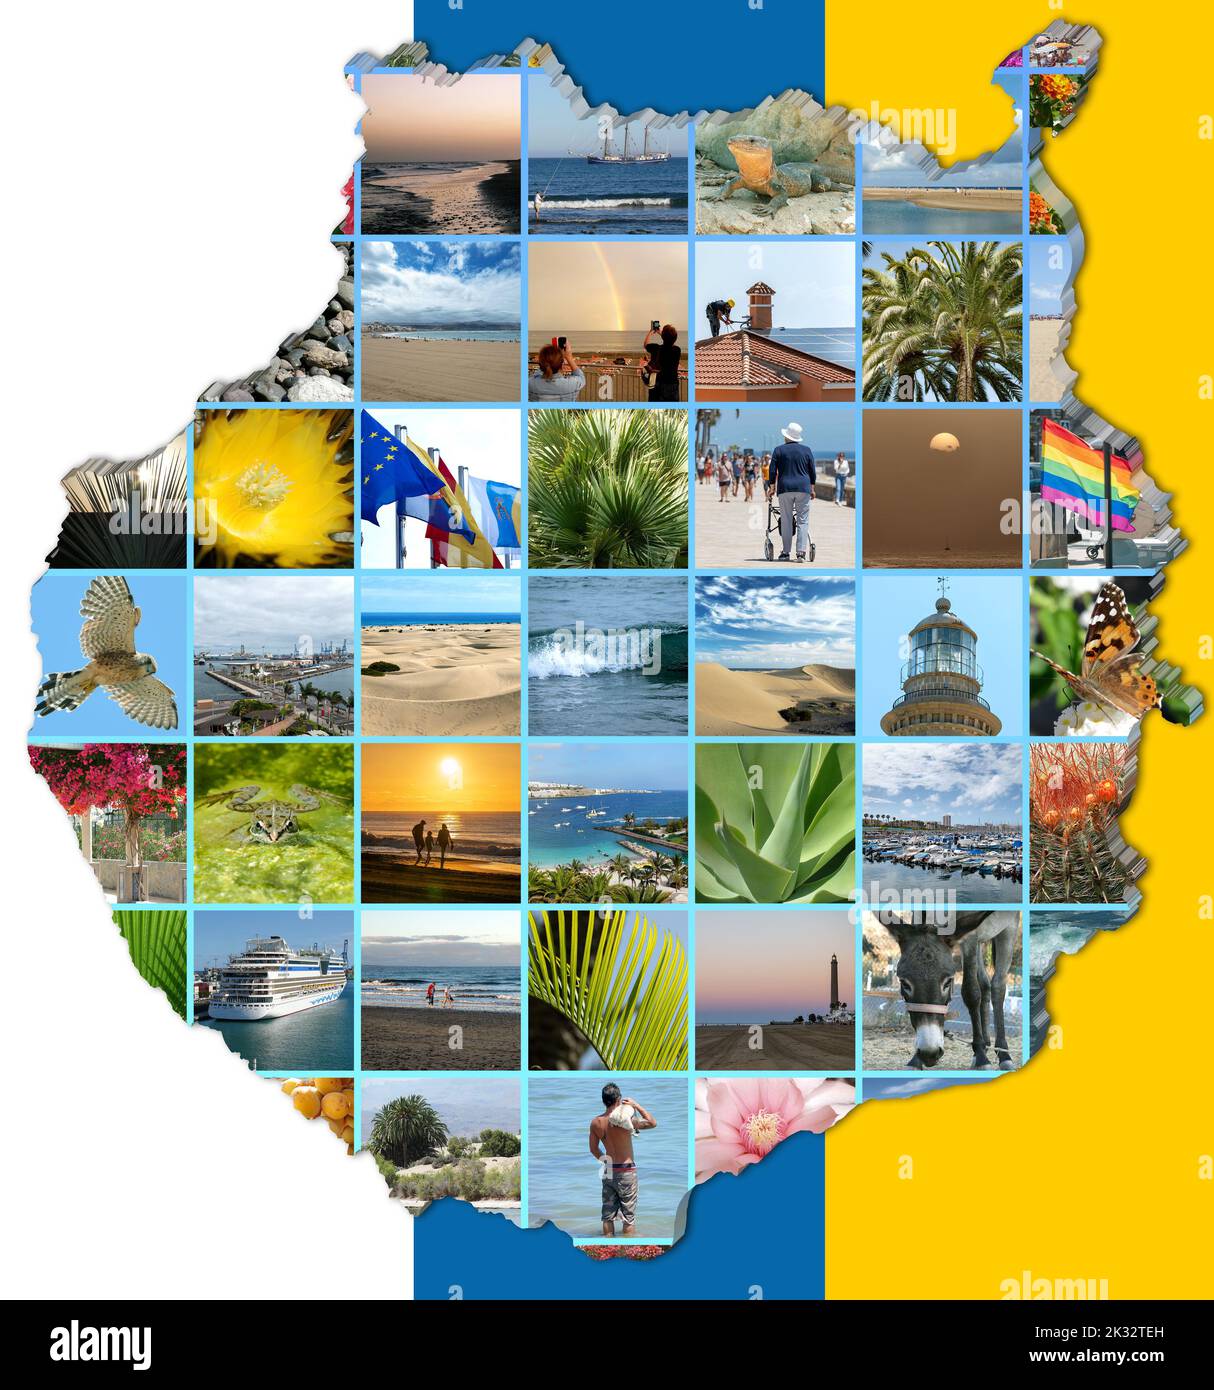 Collage of Gran Canaria photos on map view of Gran Canaria, with colours of the canarian flag as background. Stock Photo